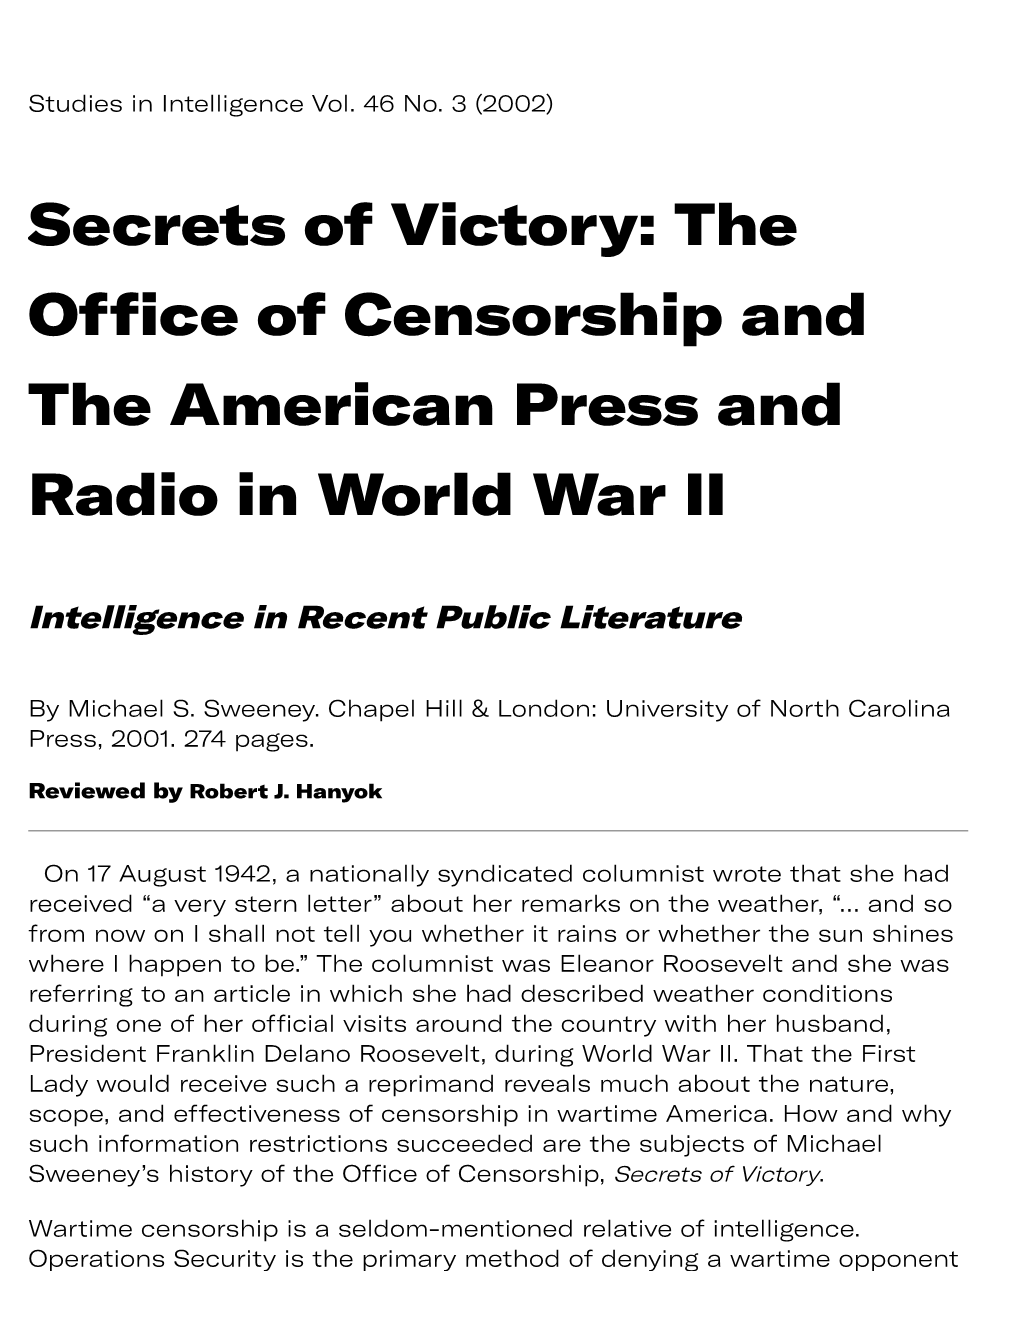 Secrets of Victory: the Office of Censorship and the American